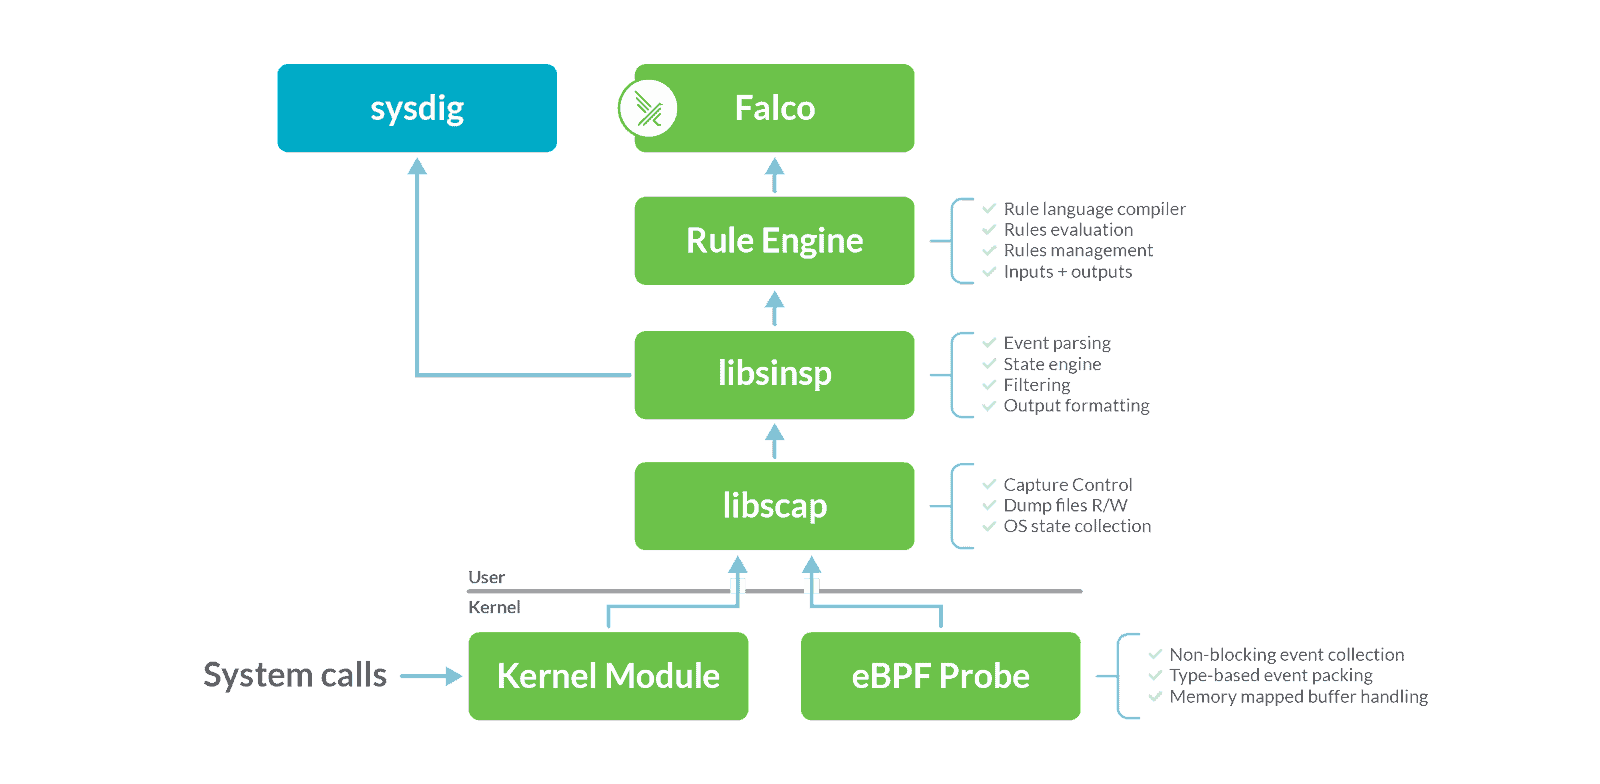 Diagram showing the main components at the base of Falco and Open Source sysdig